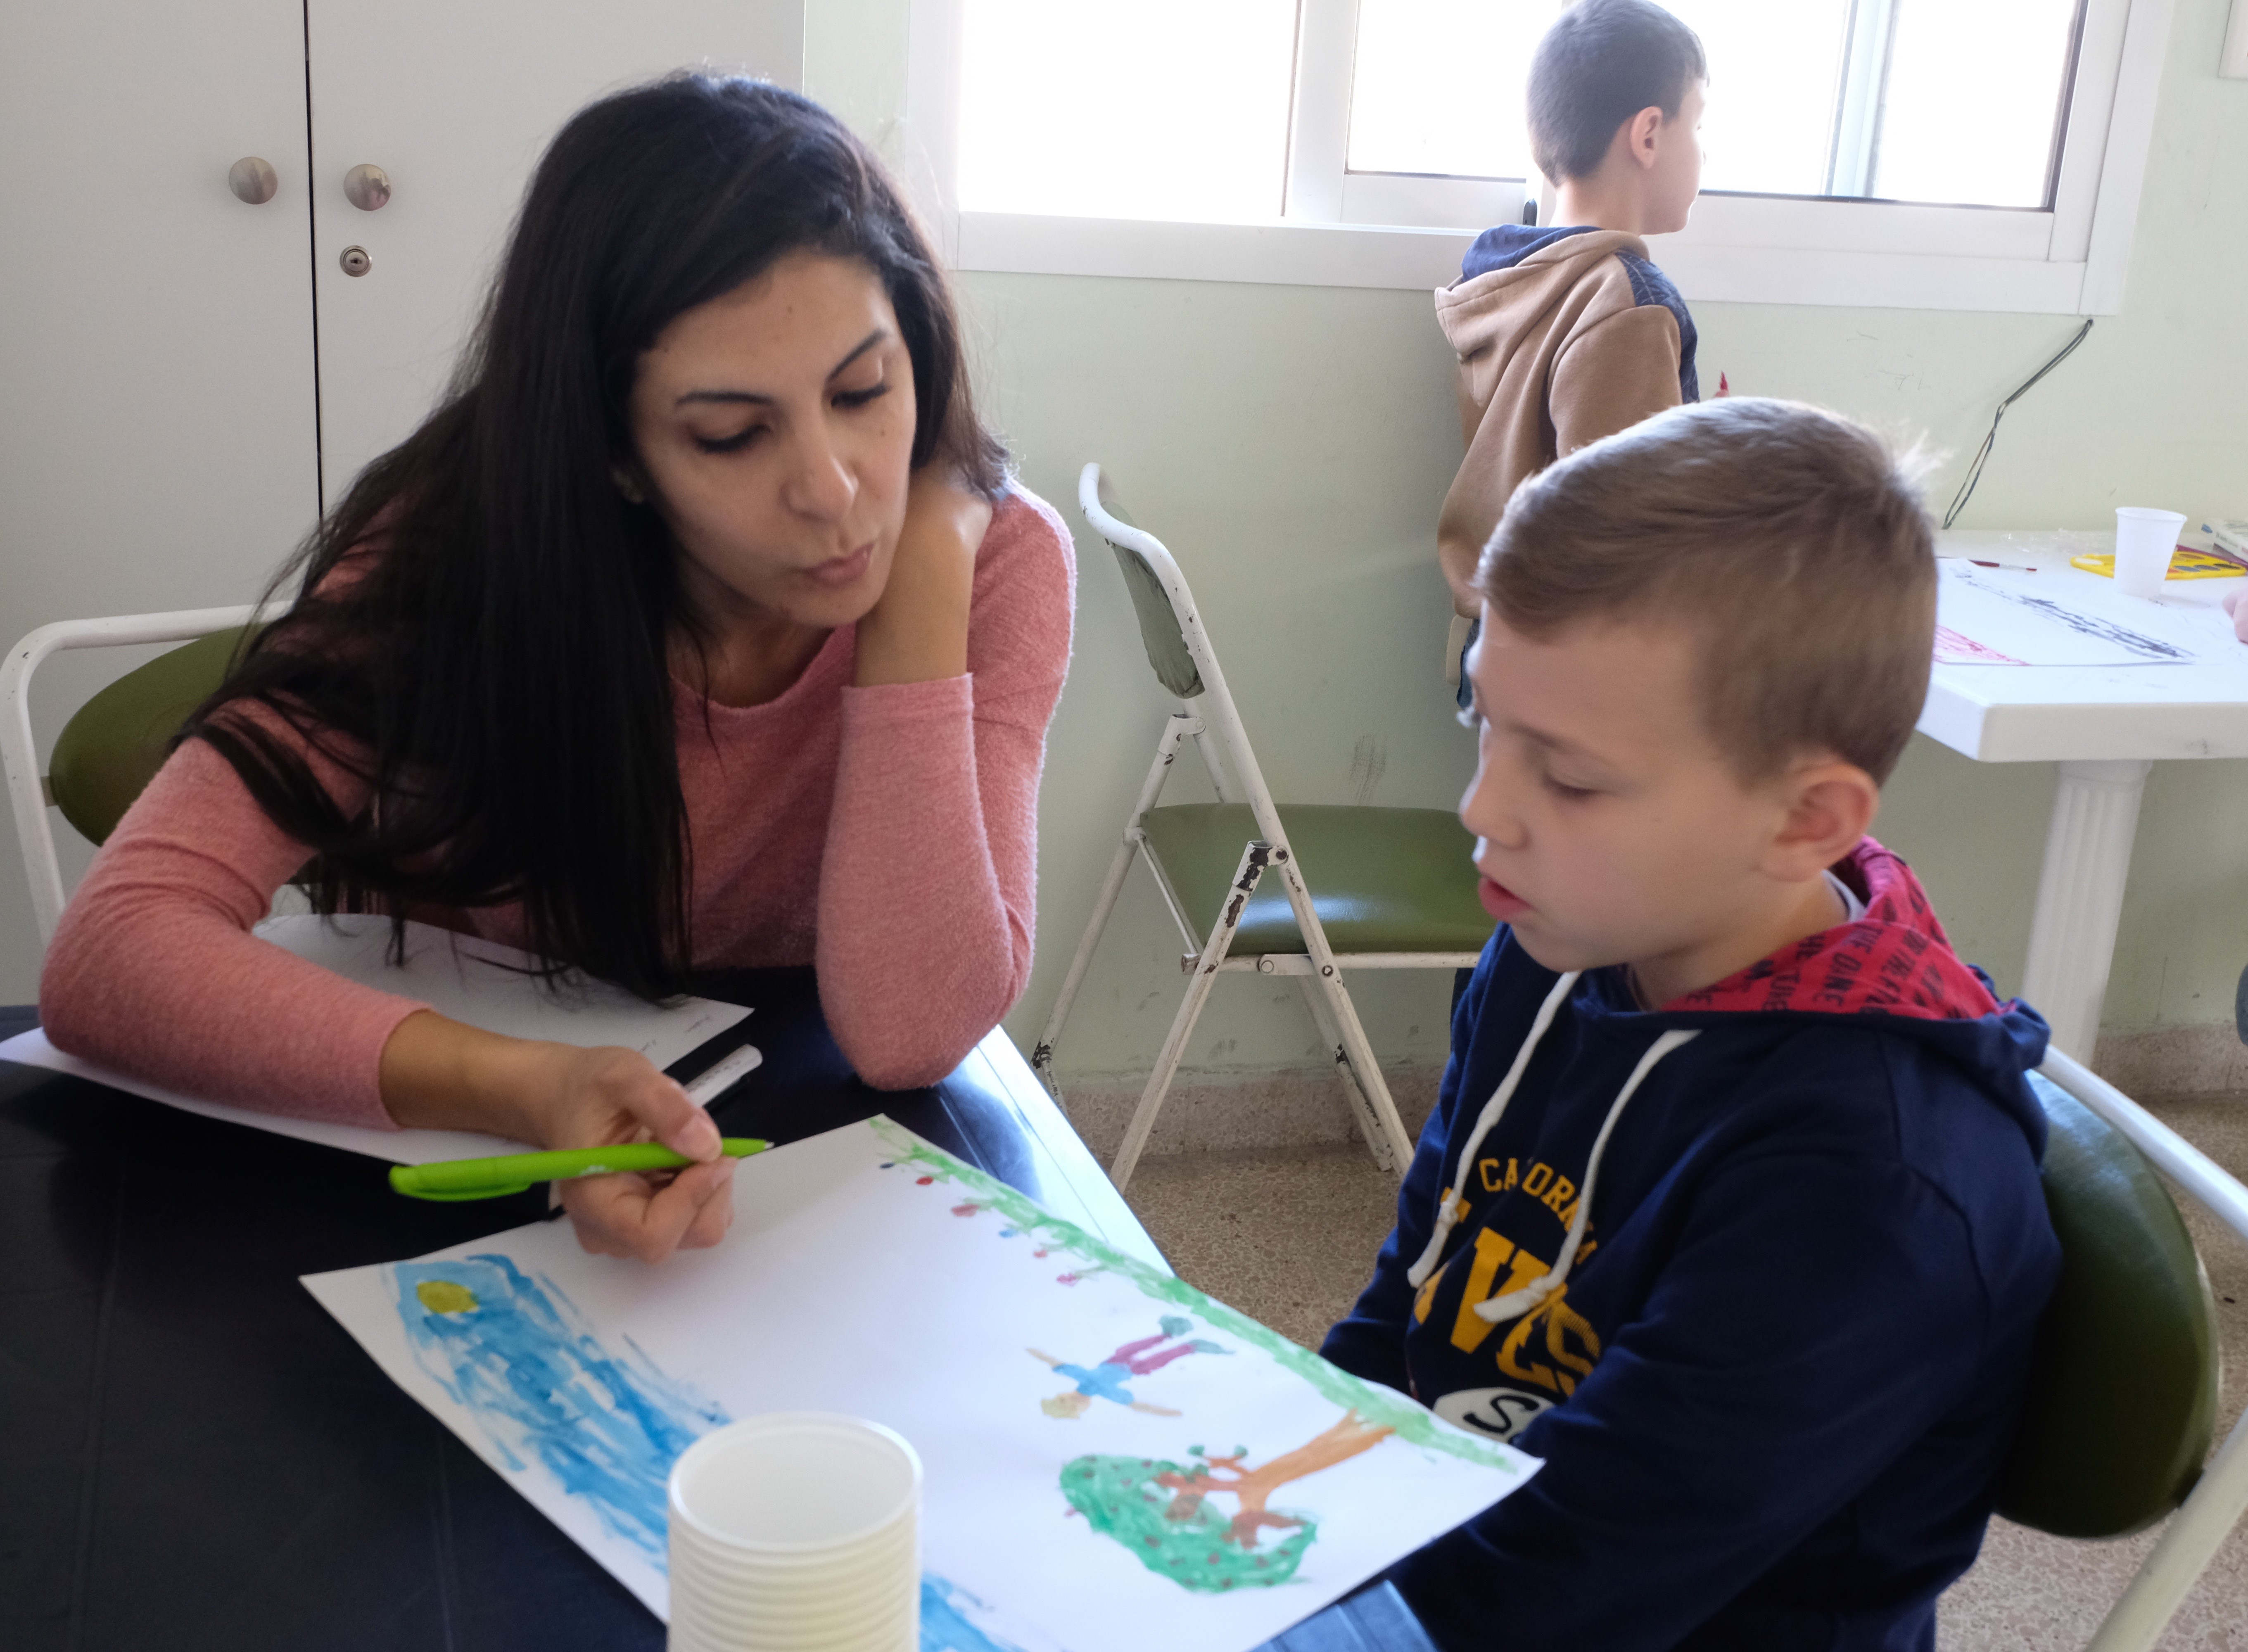 Raana, a licensed child psychologist, conducts pre- and post-program trauma assessments of our Iraqi and Syrian kids.